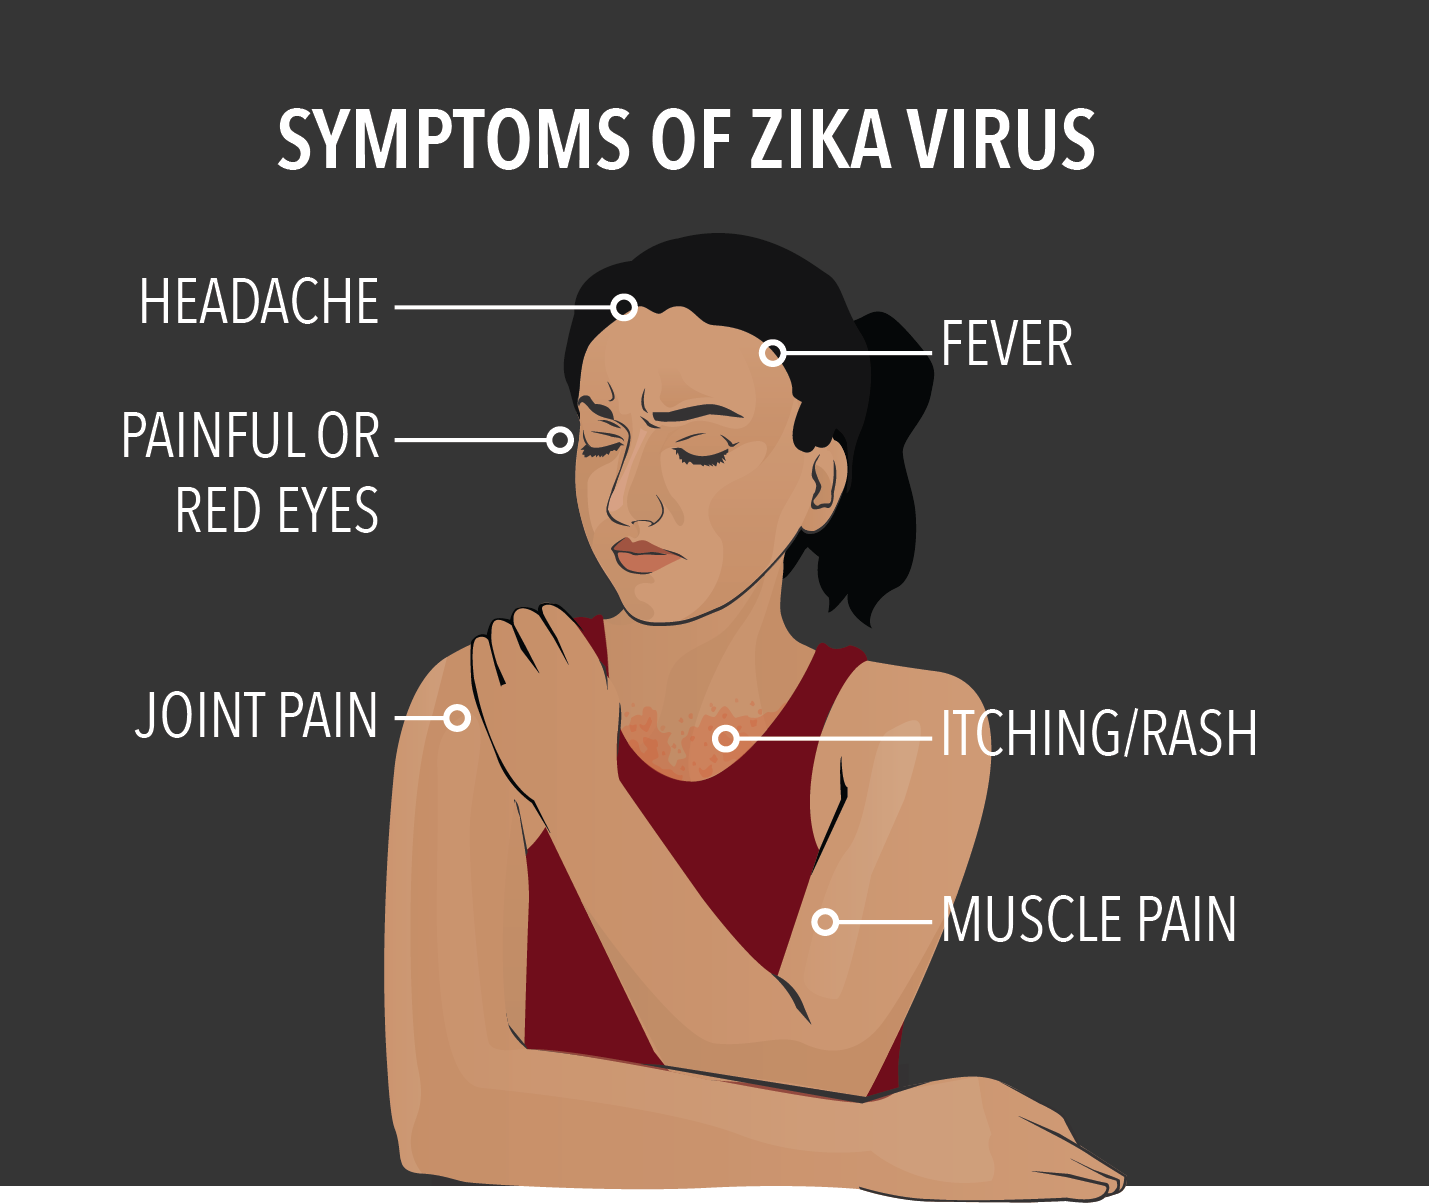 The symptoms of Zika are identical to the symptoms of mild pesticide poisoning.